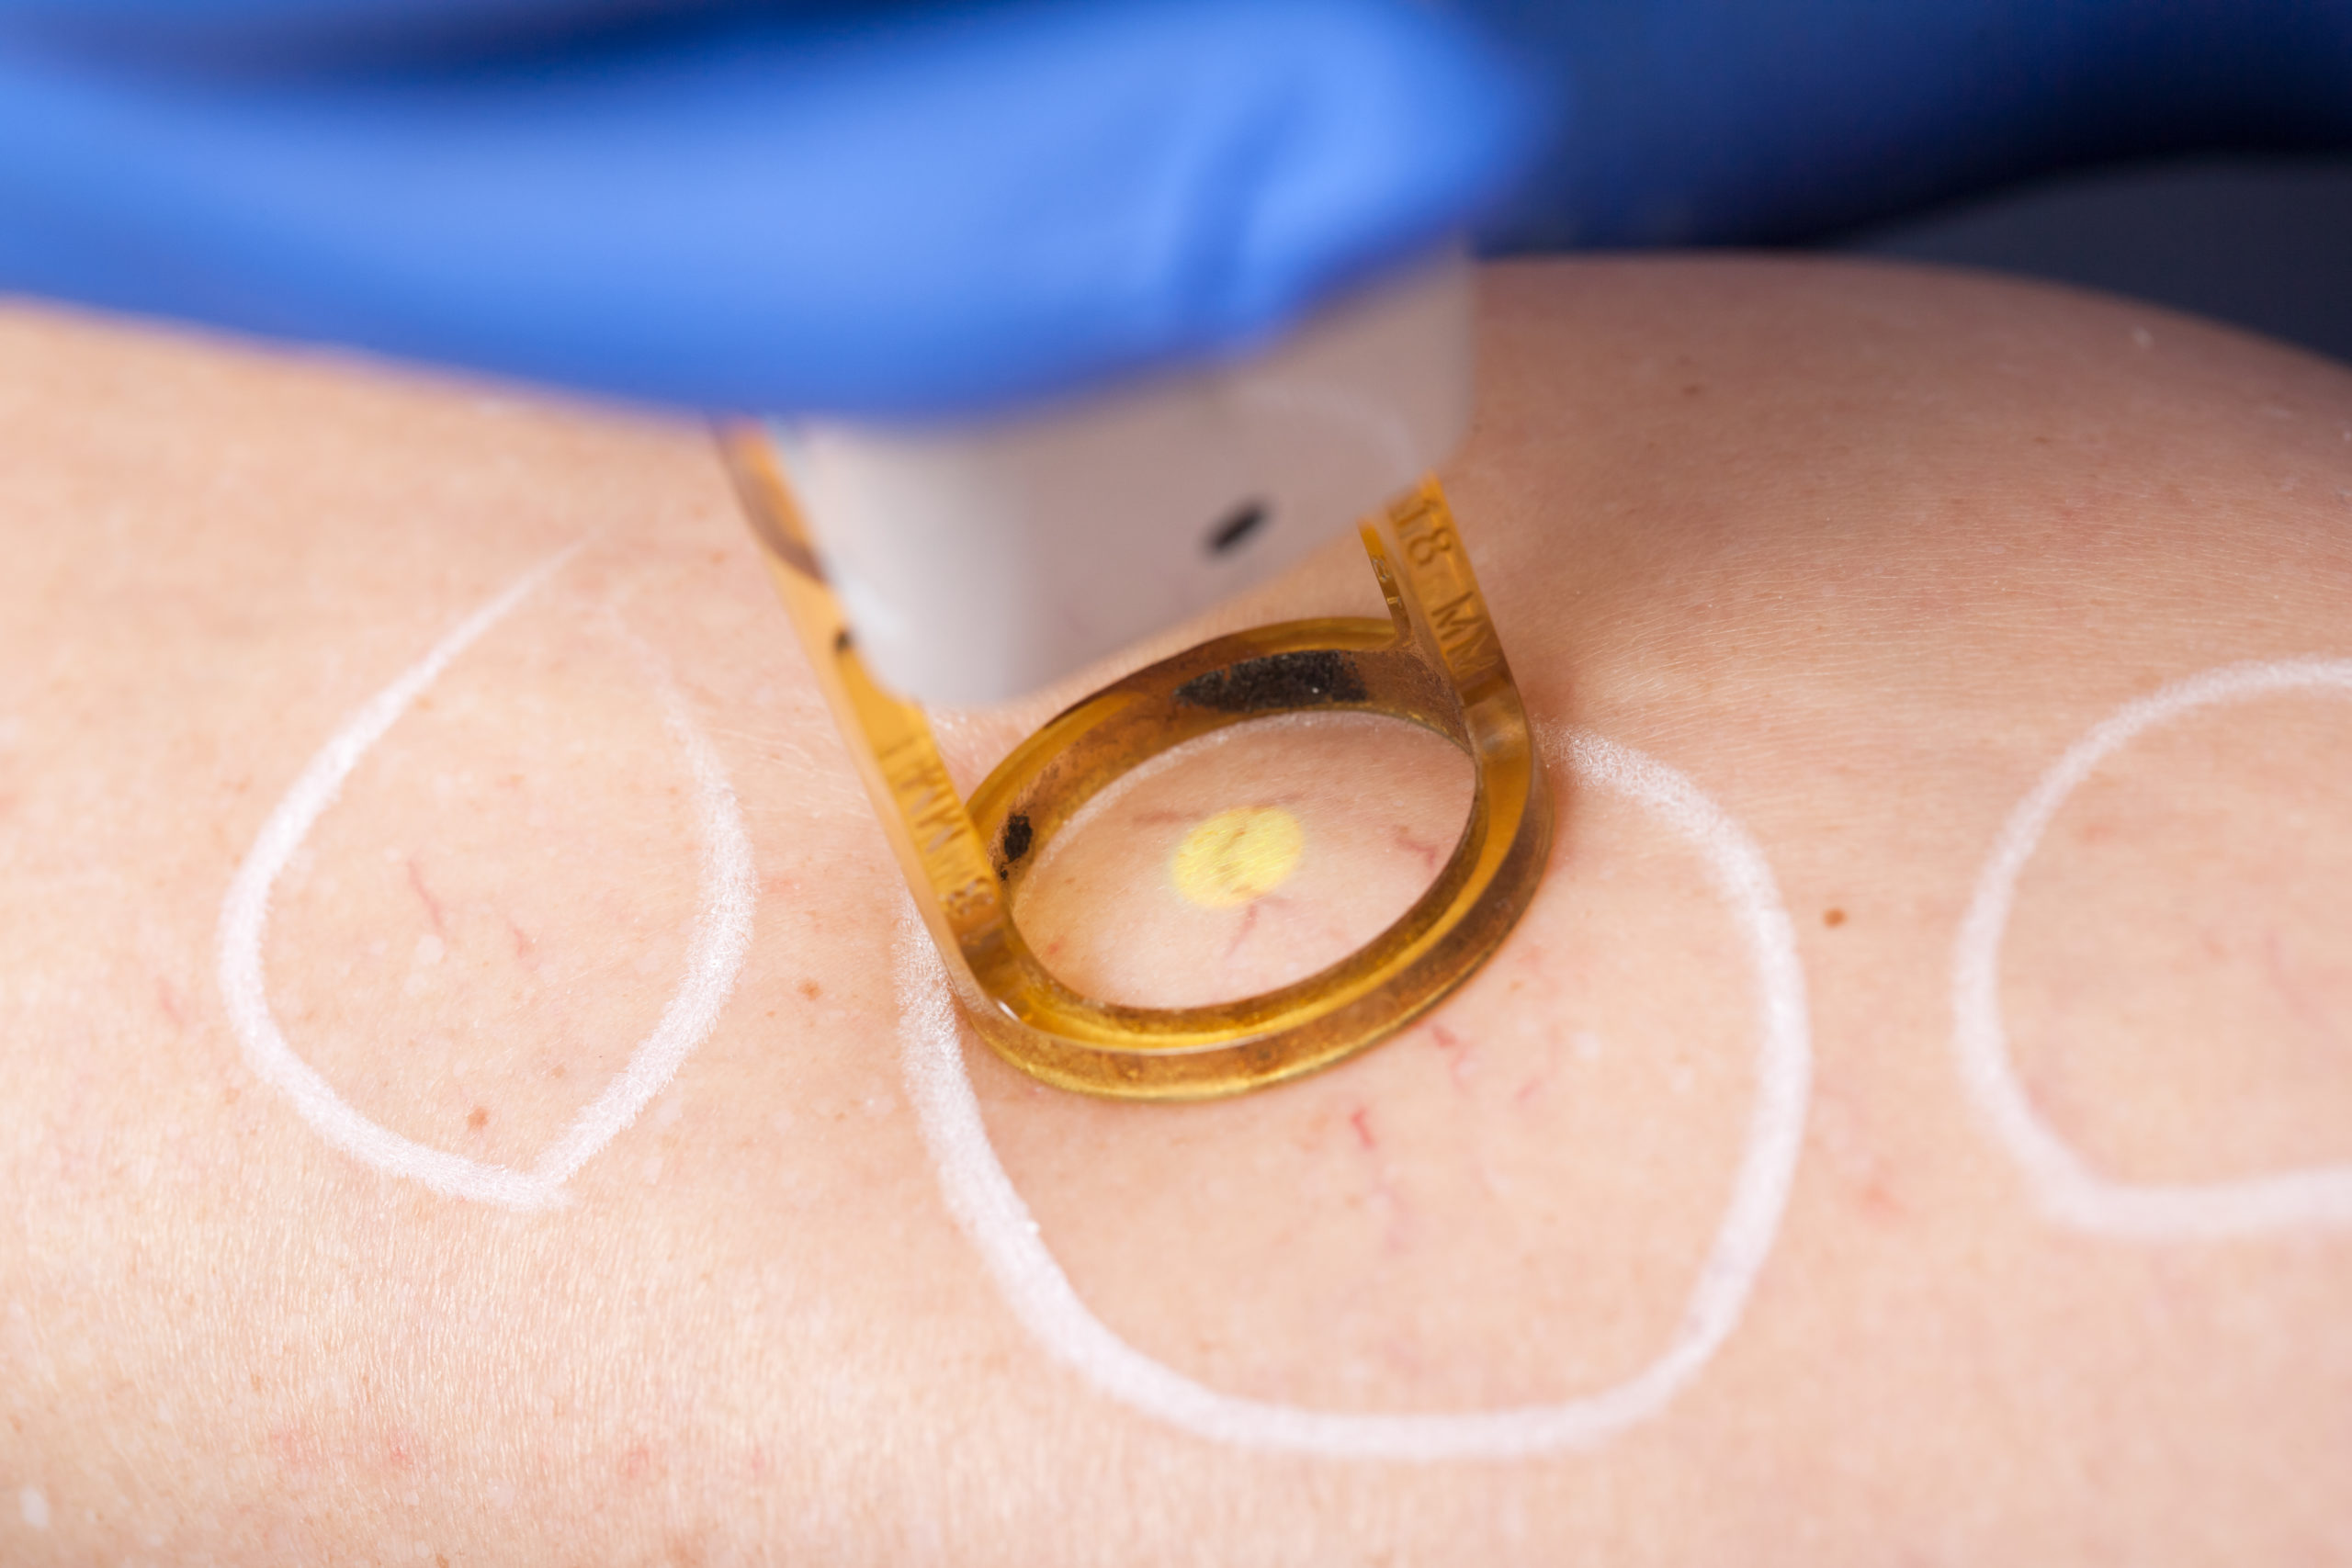 Spider Veins Being Treated with Skin Laser. Circles Marked for the Laser.